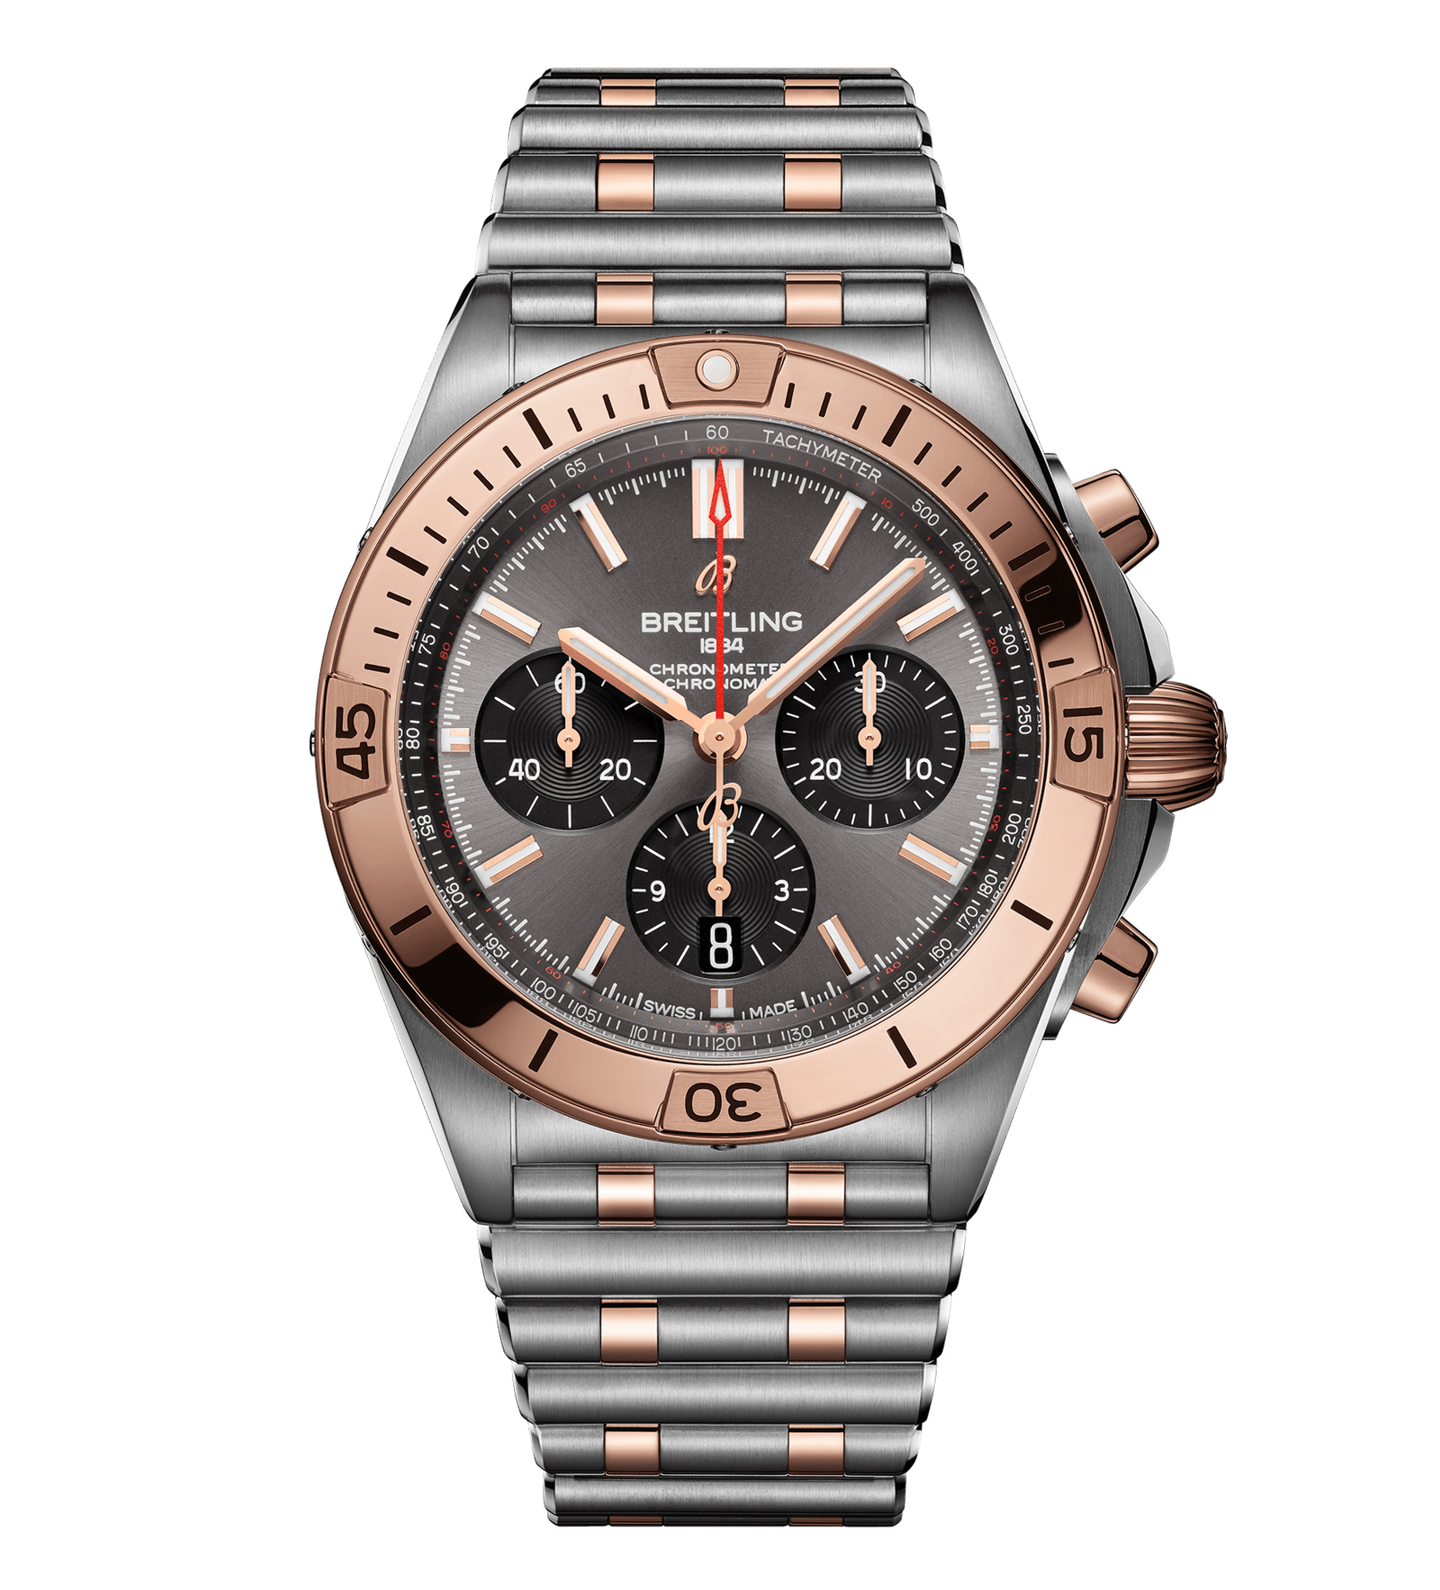 Breitling Chronomat B01 Chronograph 42 Steel & 18K Red Gold with Anthracite Dial